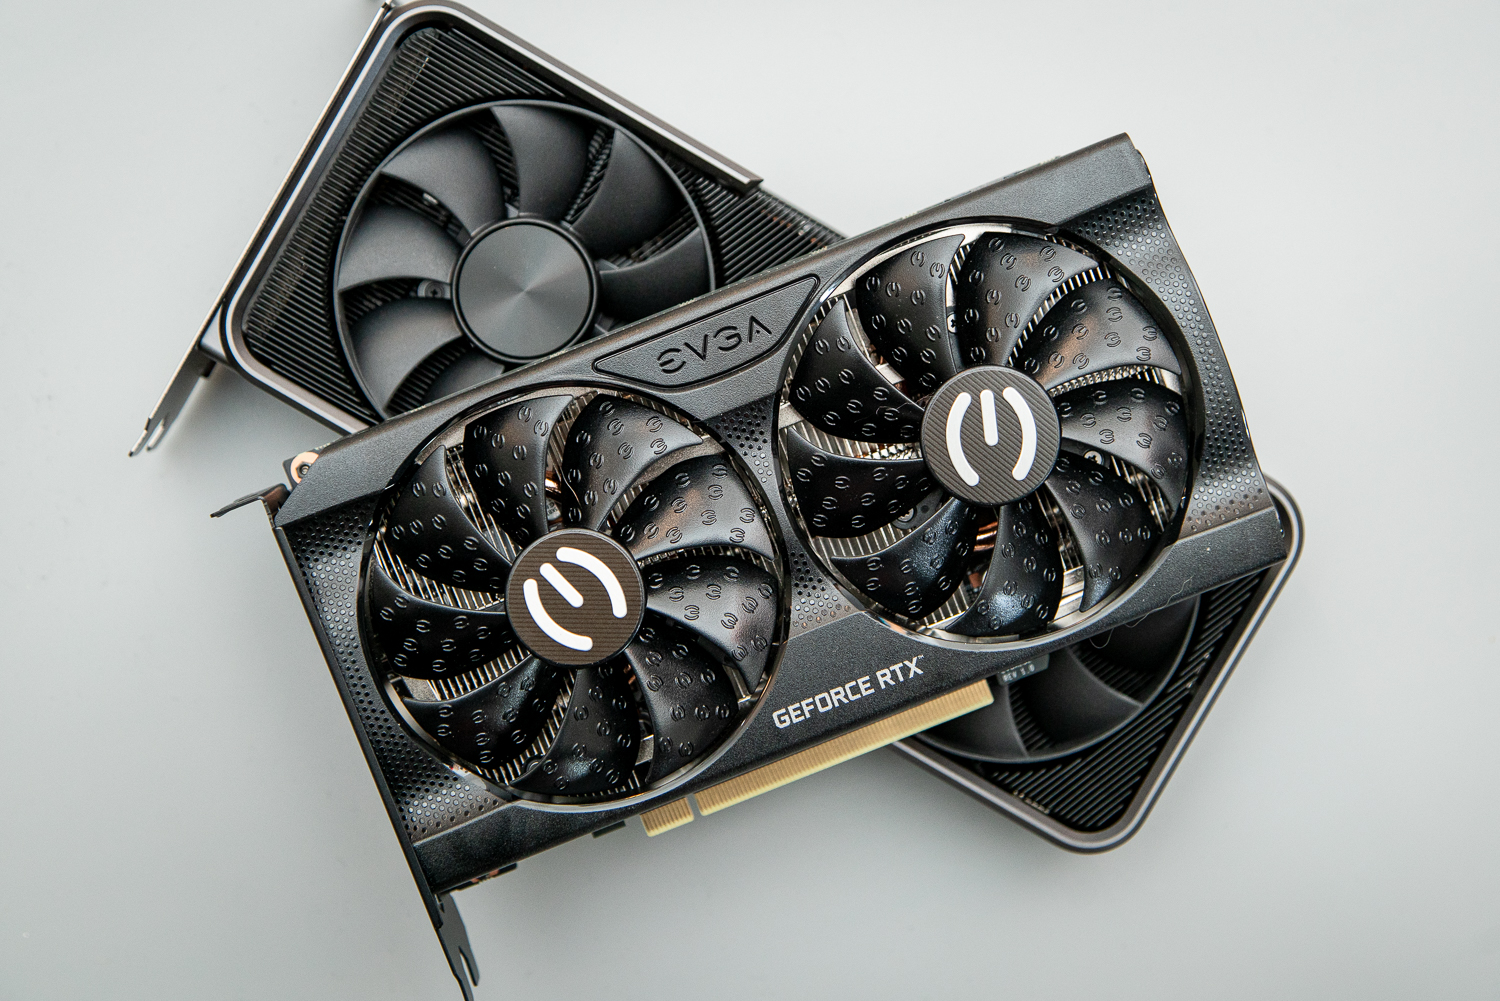 Nvidia RTX 4060 outperforms the RTX 3060 12GB variant by 23% in 3DMark